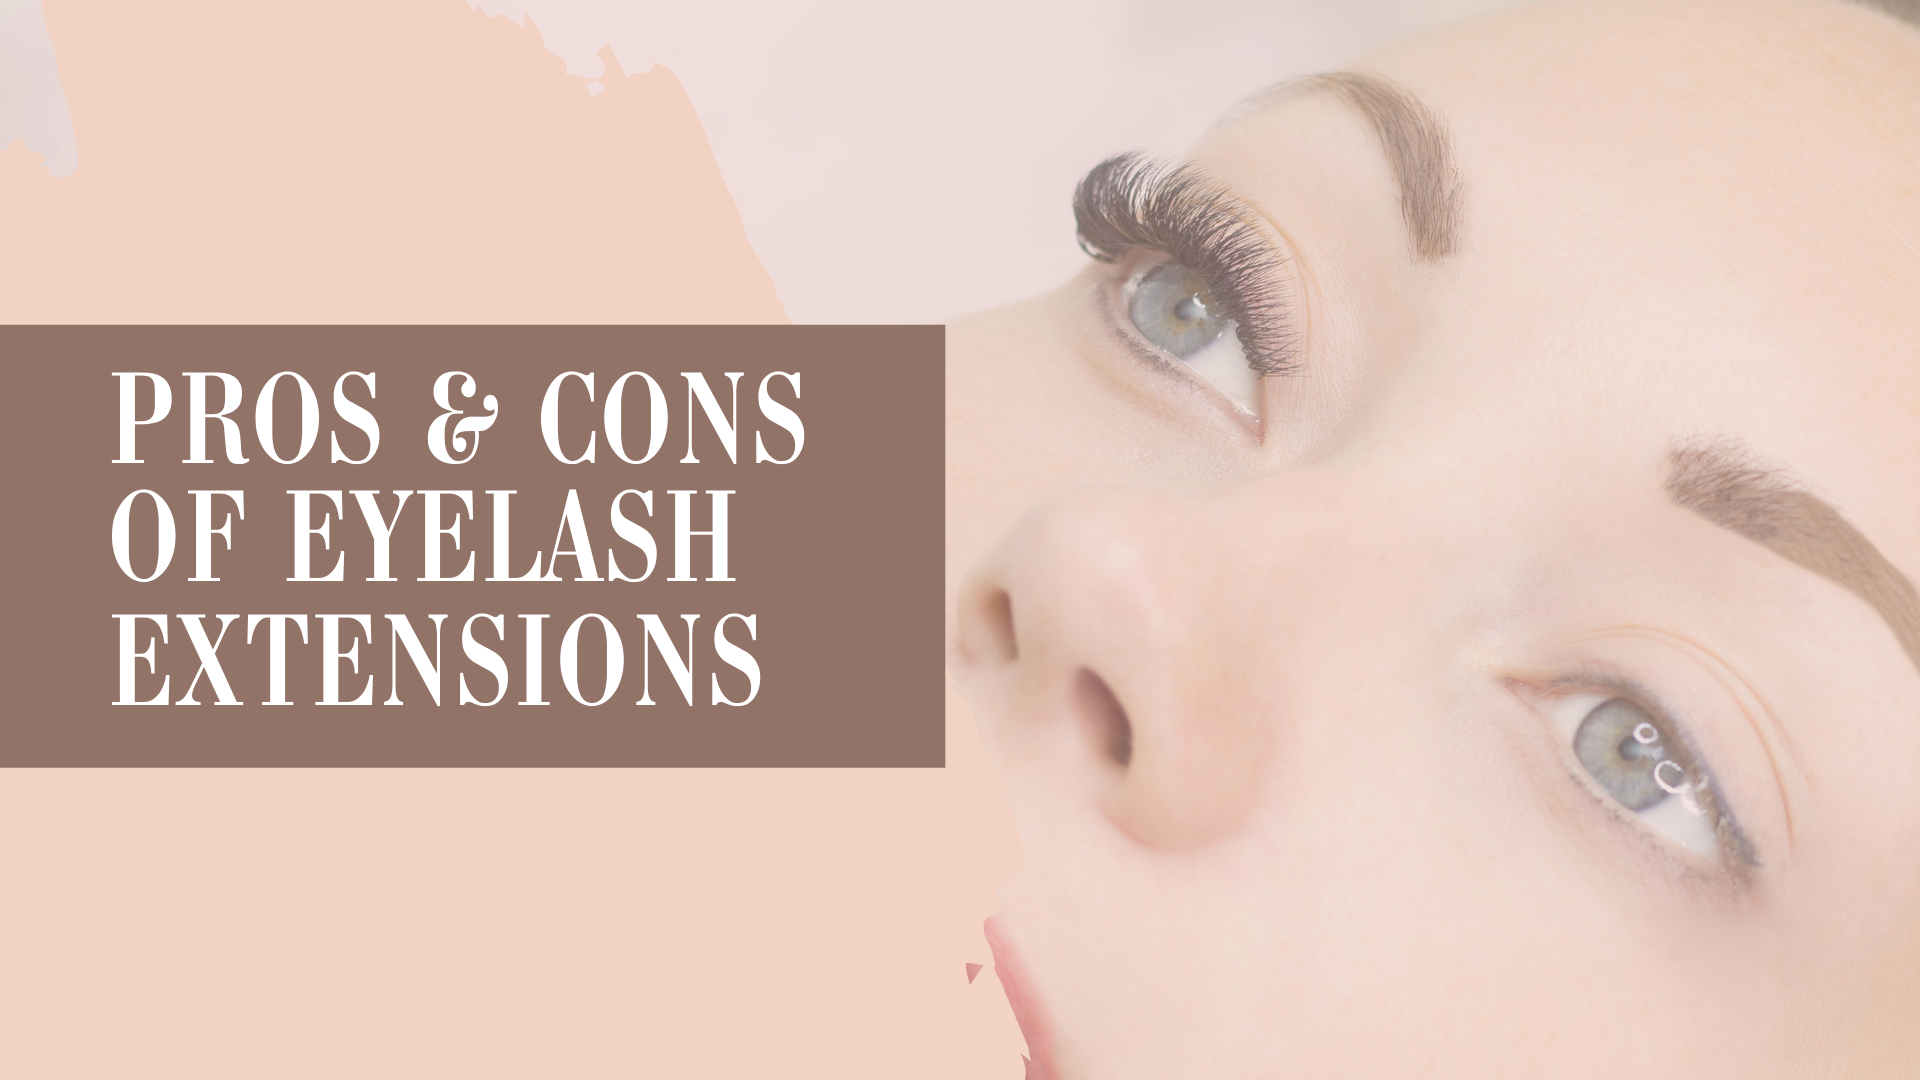 Owner of NJ Lash Studio Discusses the Pros and Cons of Eyelash Extensions